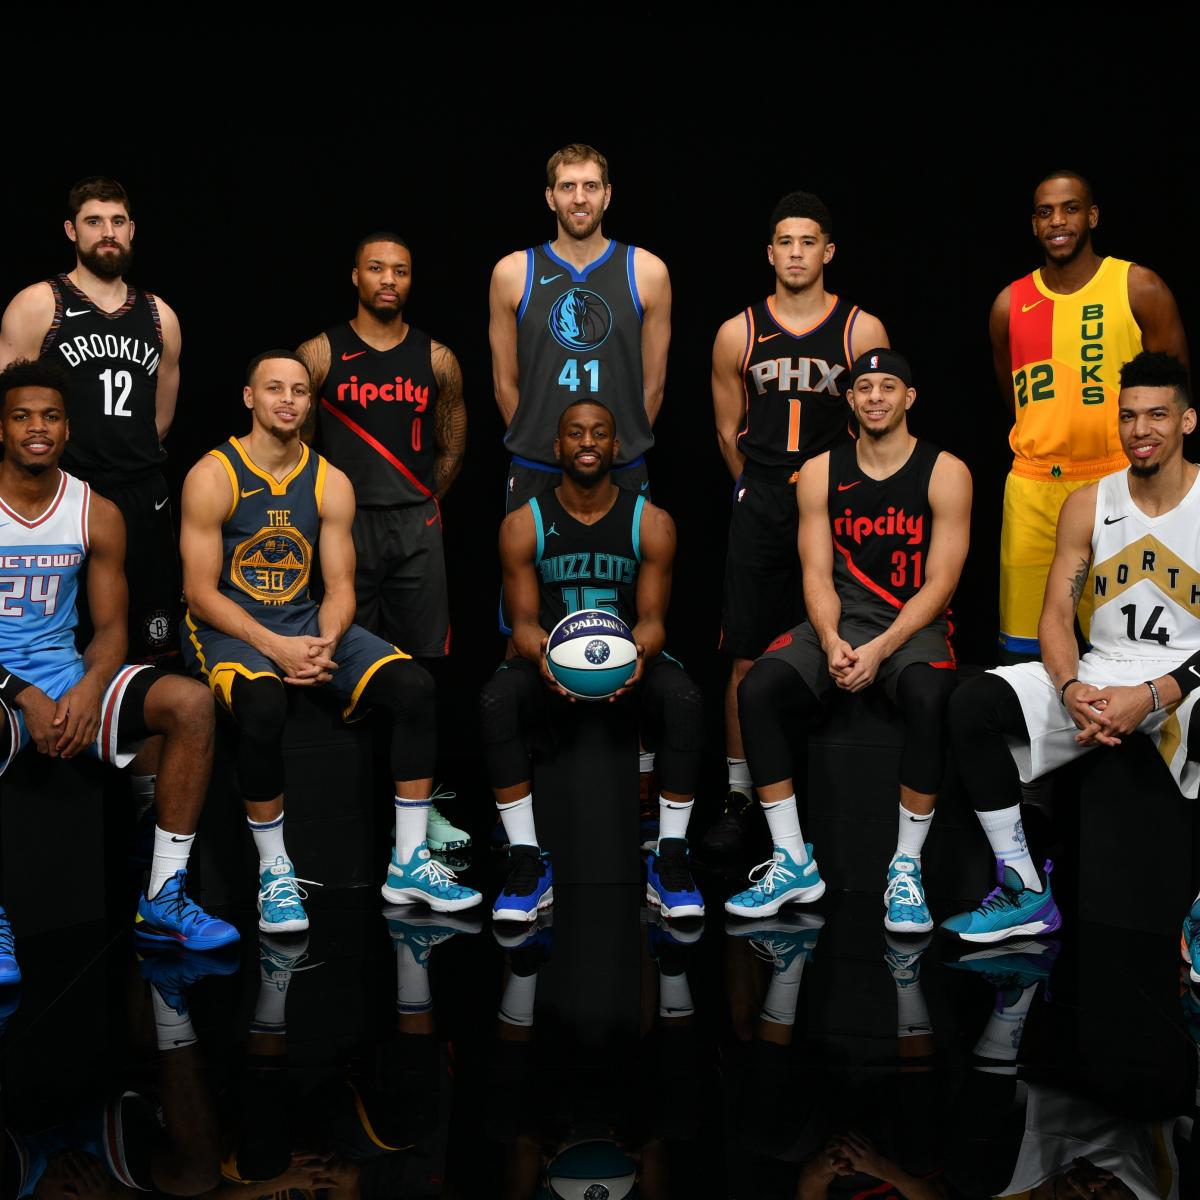 NBA All-Star Game Uniforms 2019: Pictures and Breakdown of This